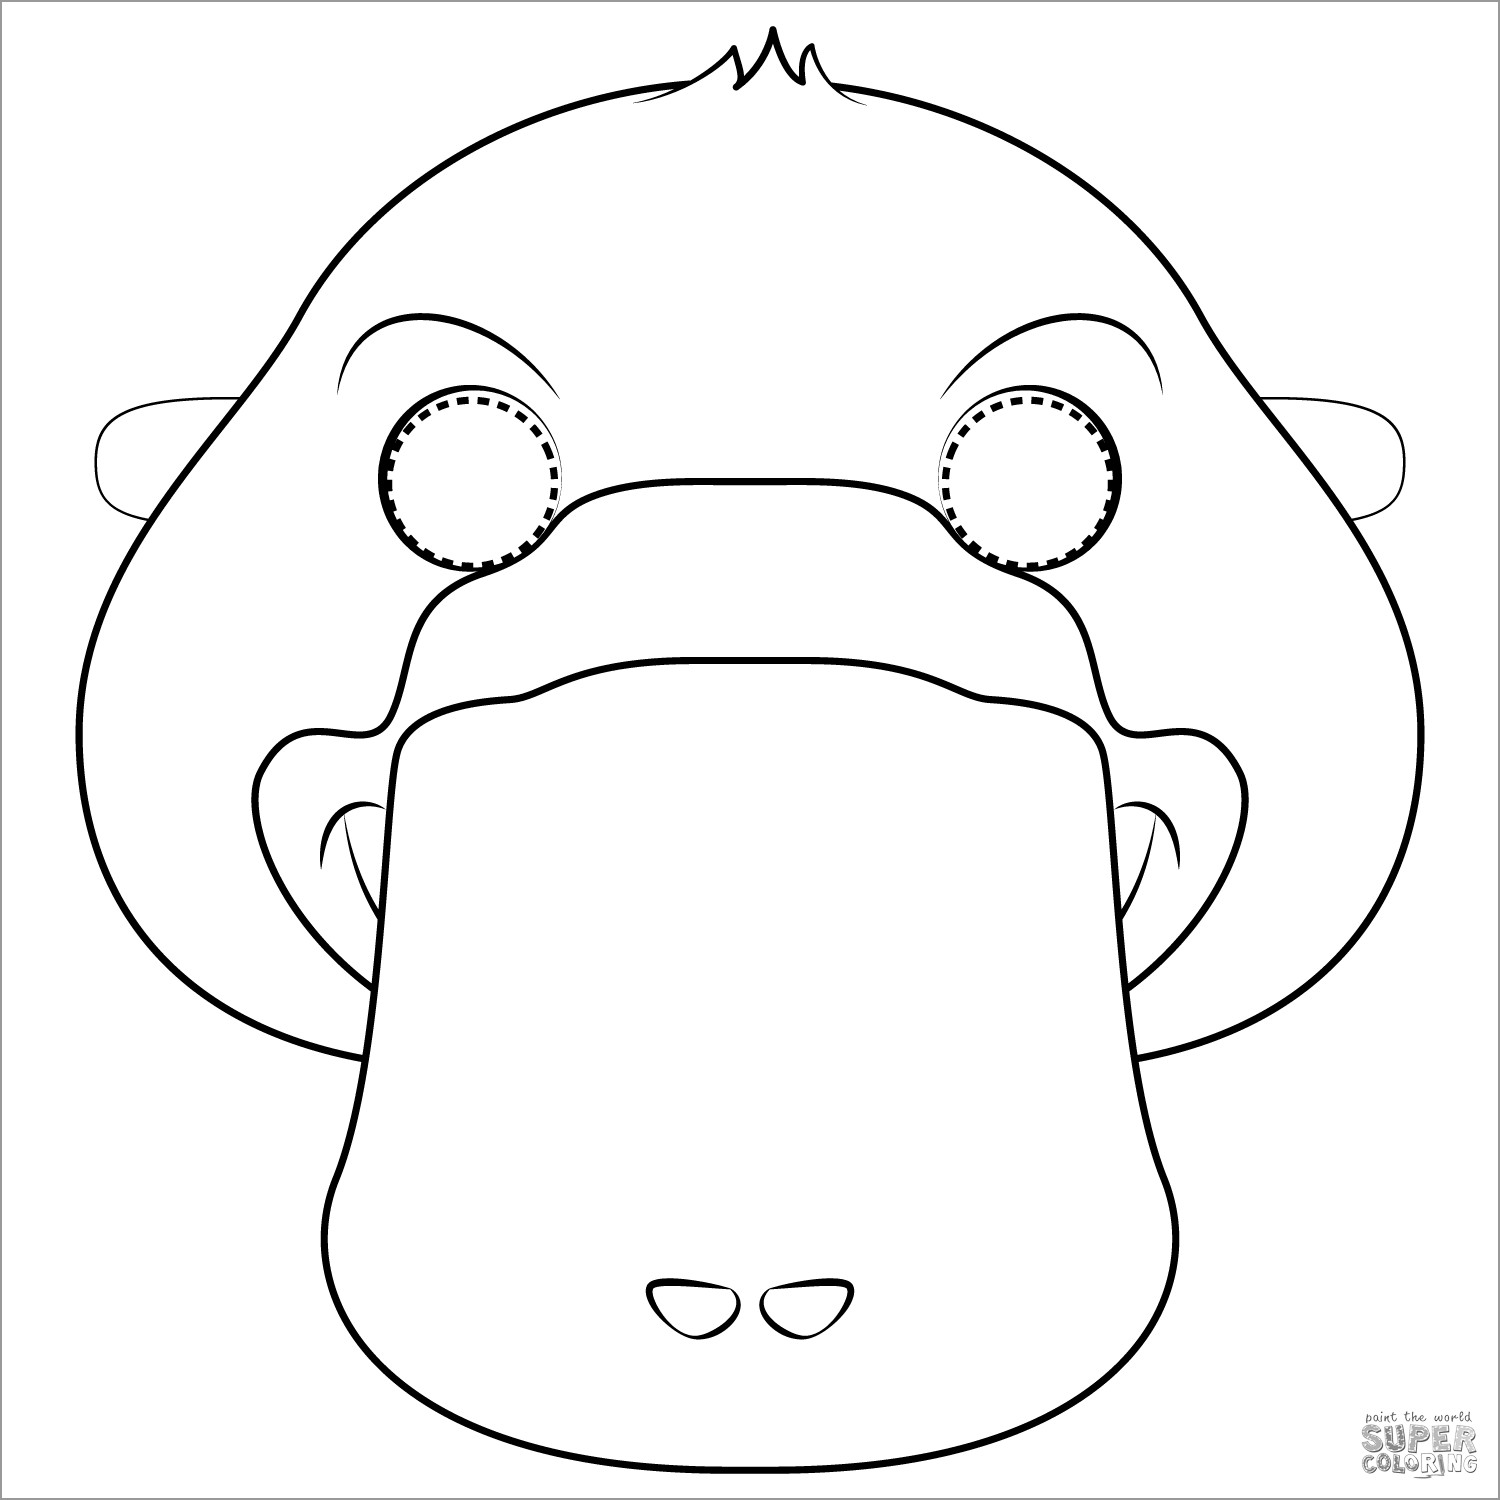 Platypus Mask Coloring Page